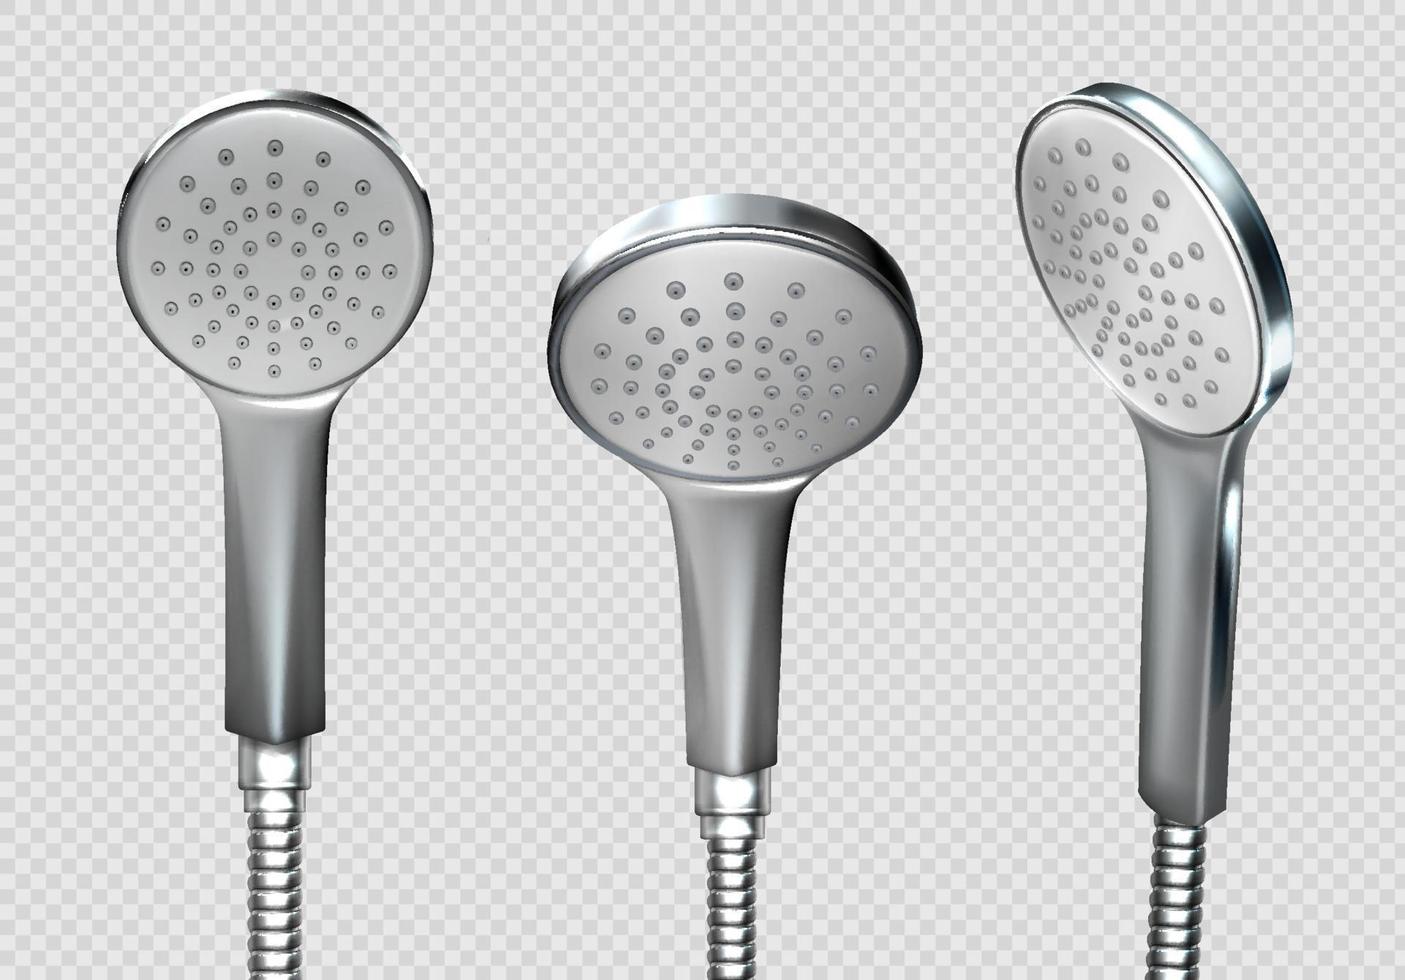 Shower heads with metal hose and nozzle for water vector